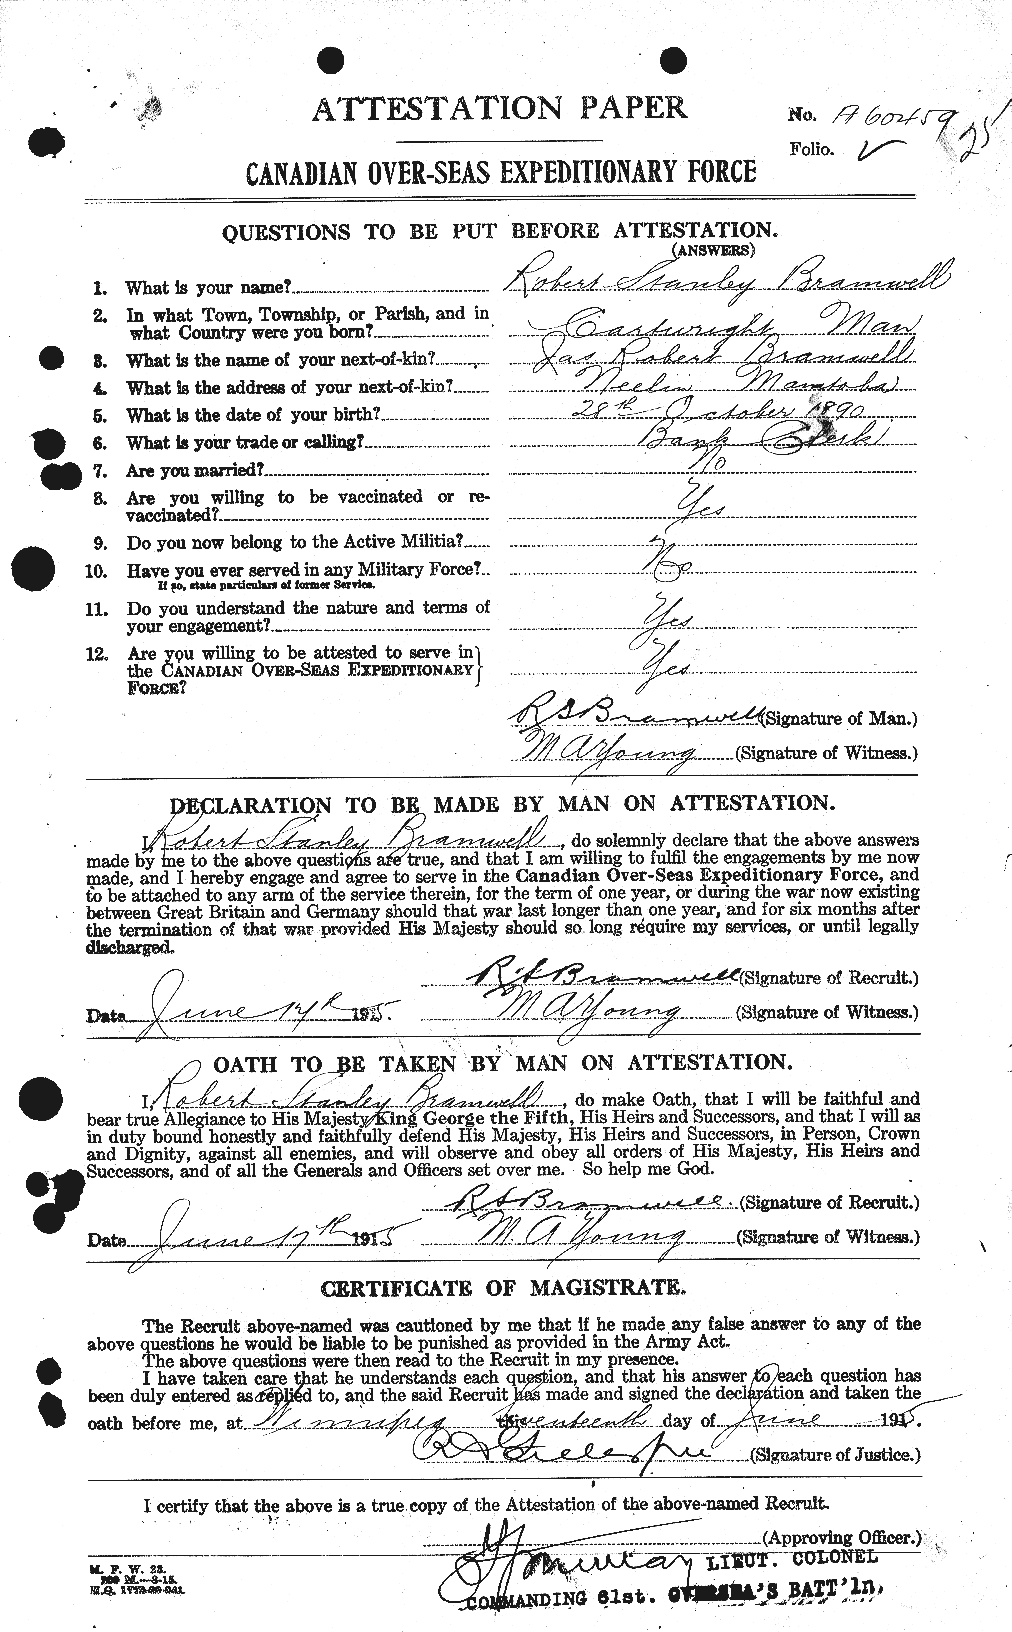 Personnel Records of the First World War - CEF 259640a